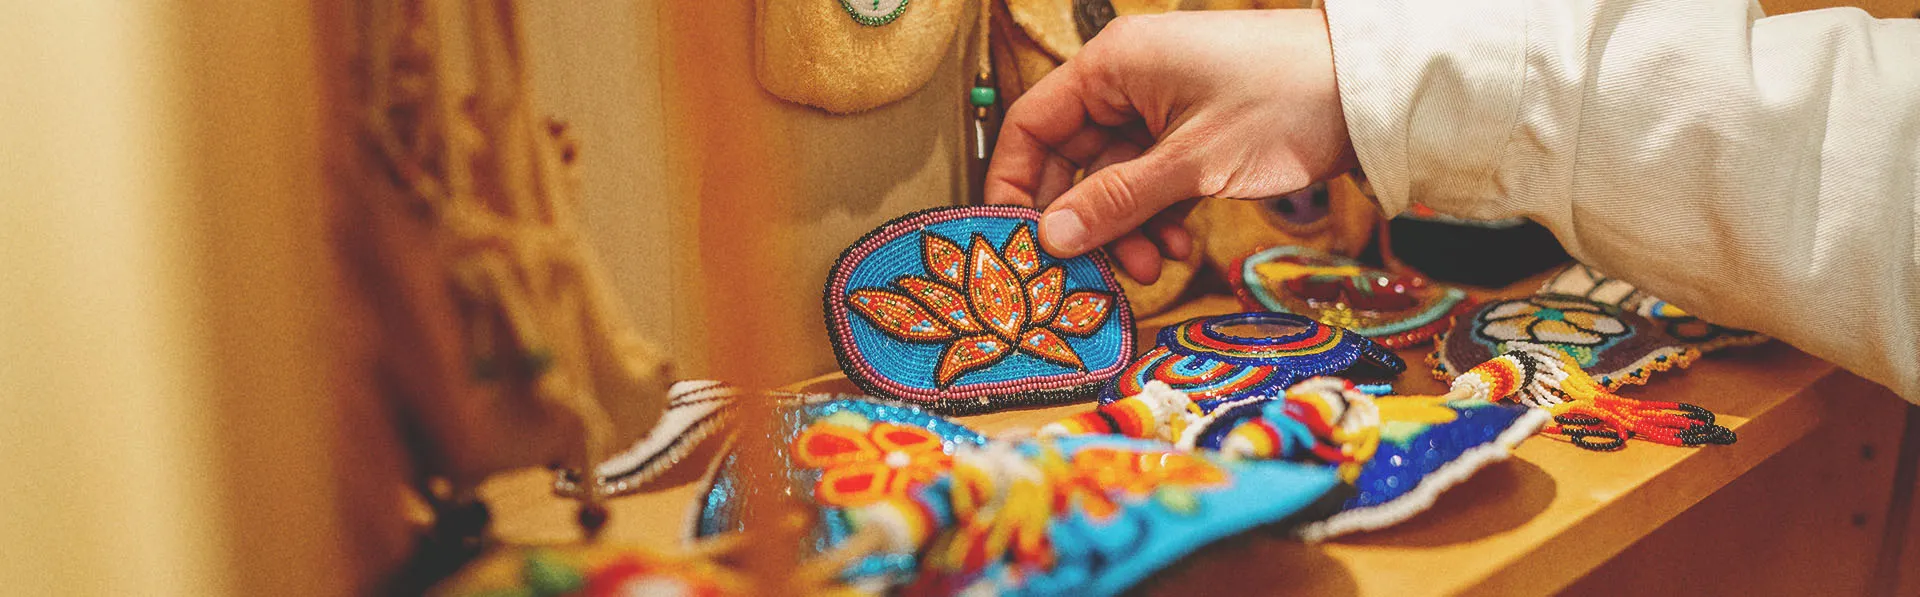 Someone picks up a Beaded Orange Flower Barrette from a shelf full of other beadwork arts and crafts as well as ceremonial and medicine bags